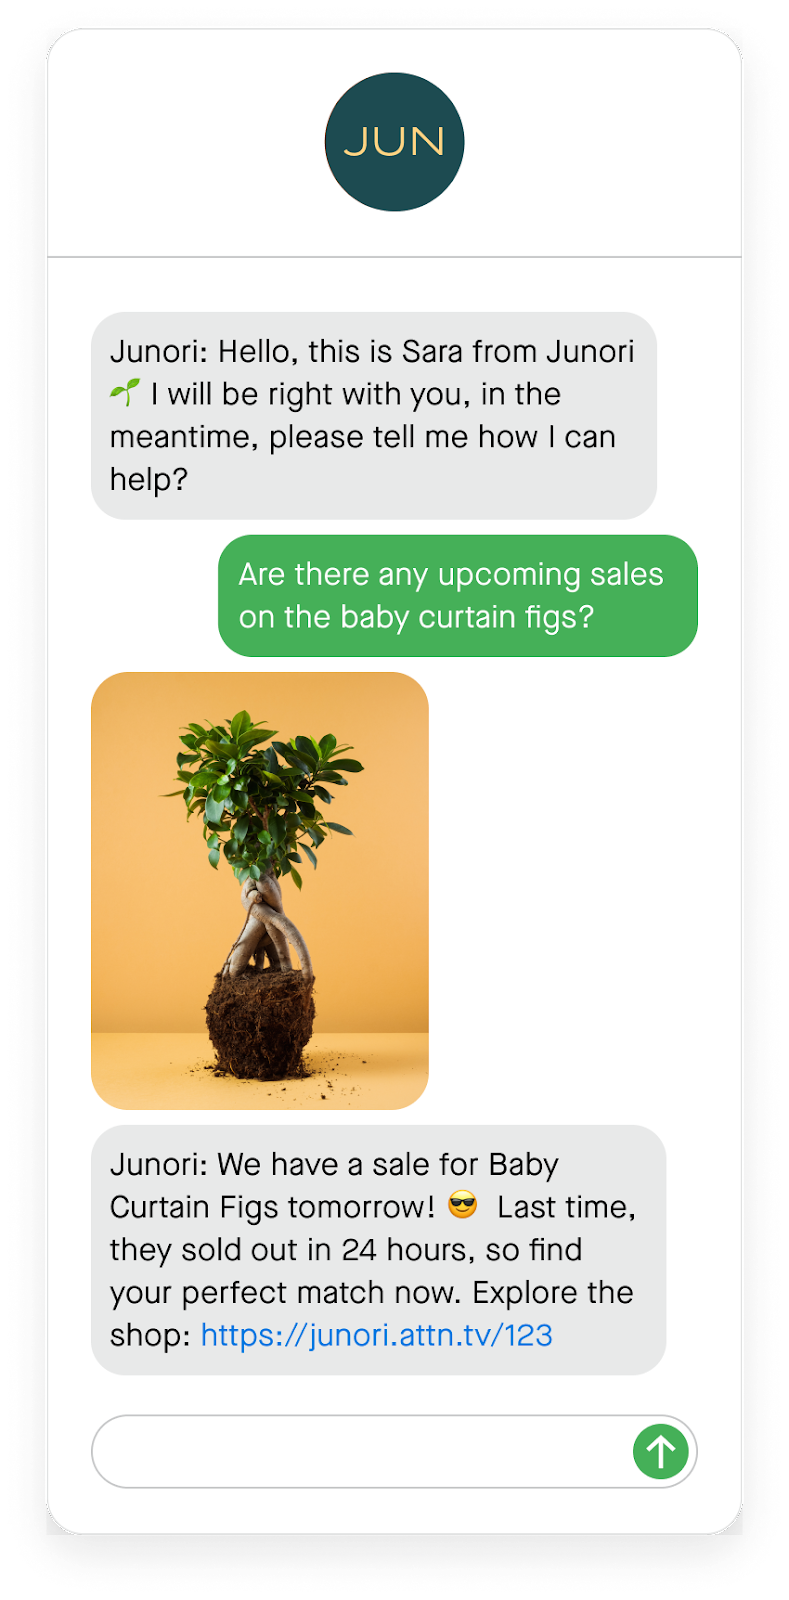 Customer view of chat with a Concierge agent in messaging app.